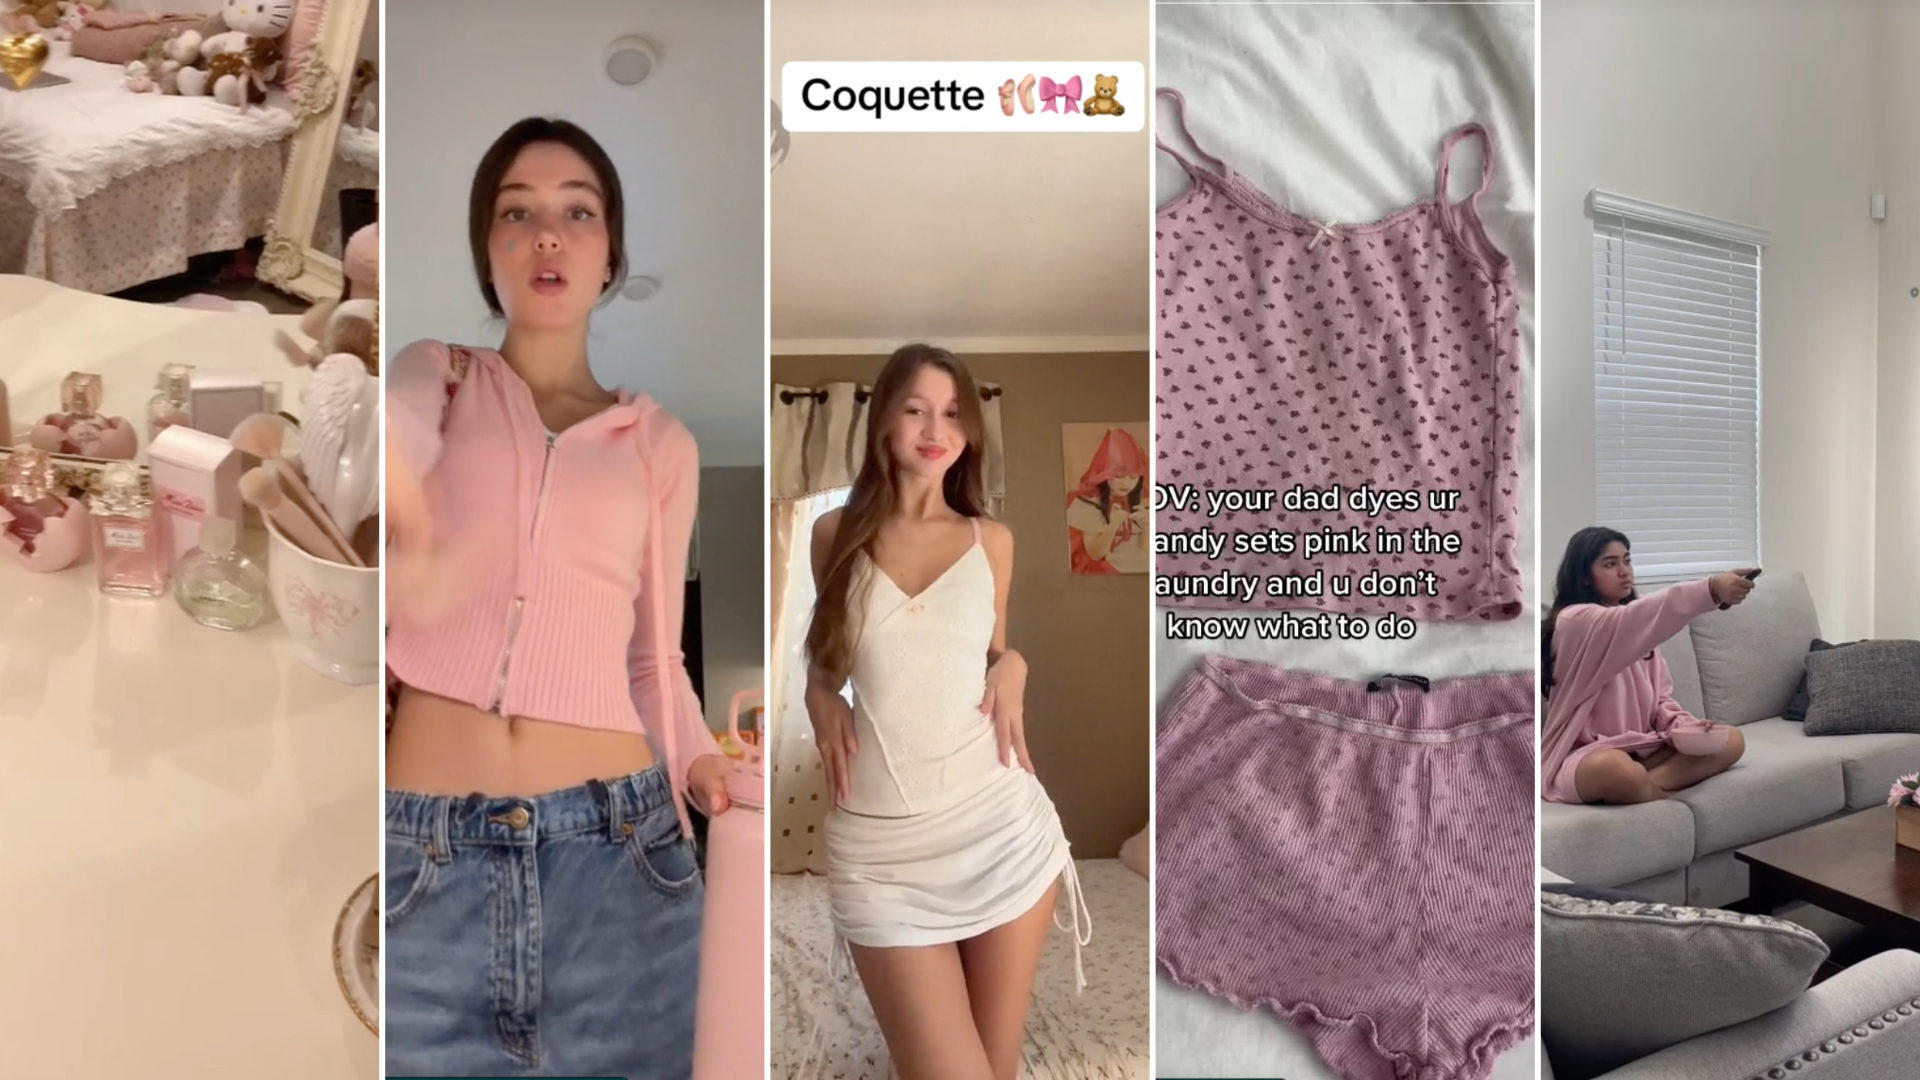 Influencers Are Embracing The Coquette Aesthetic, But What Even Is It?